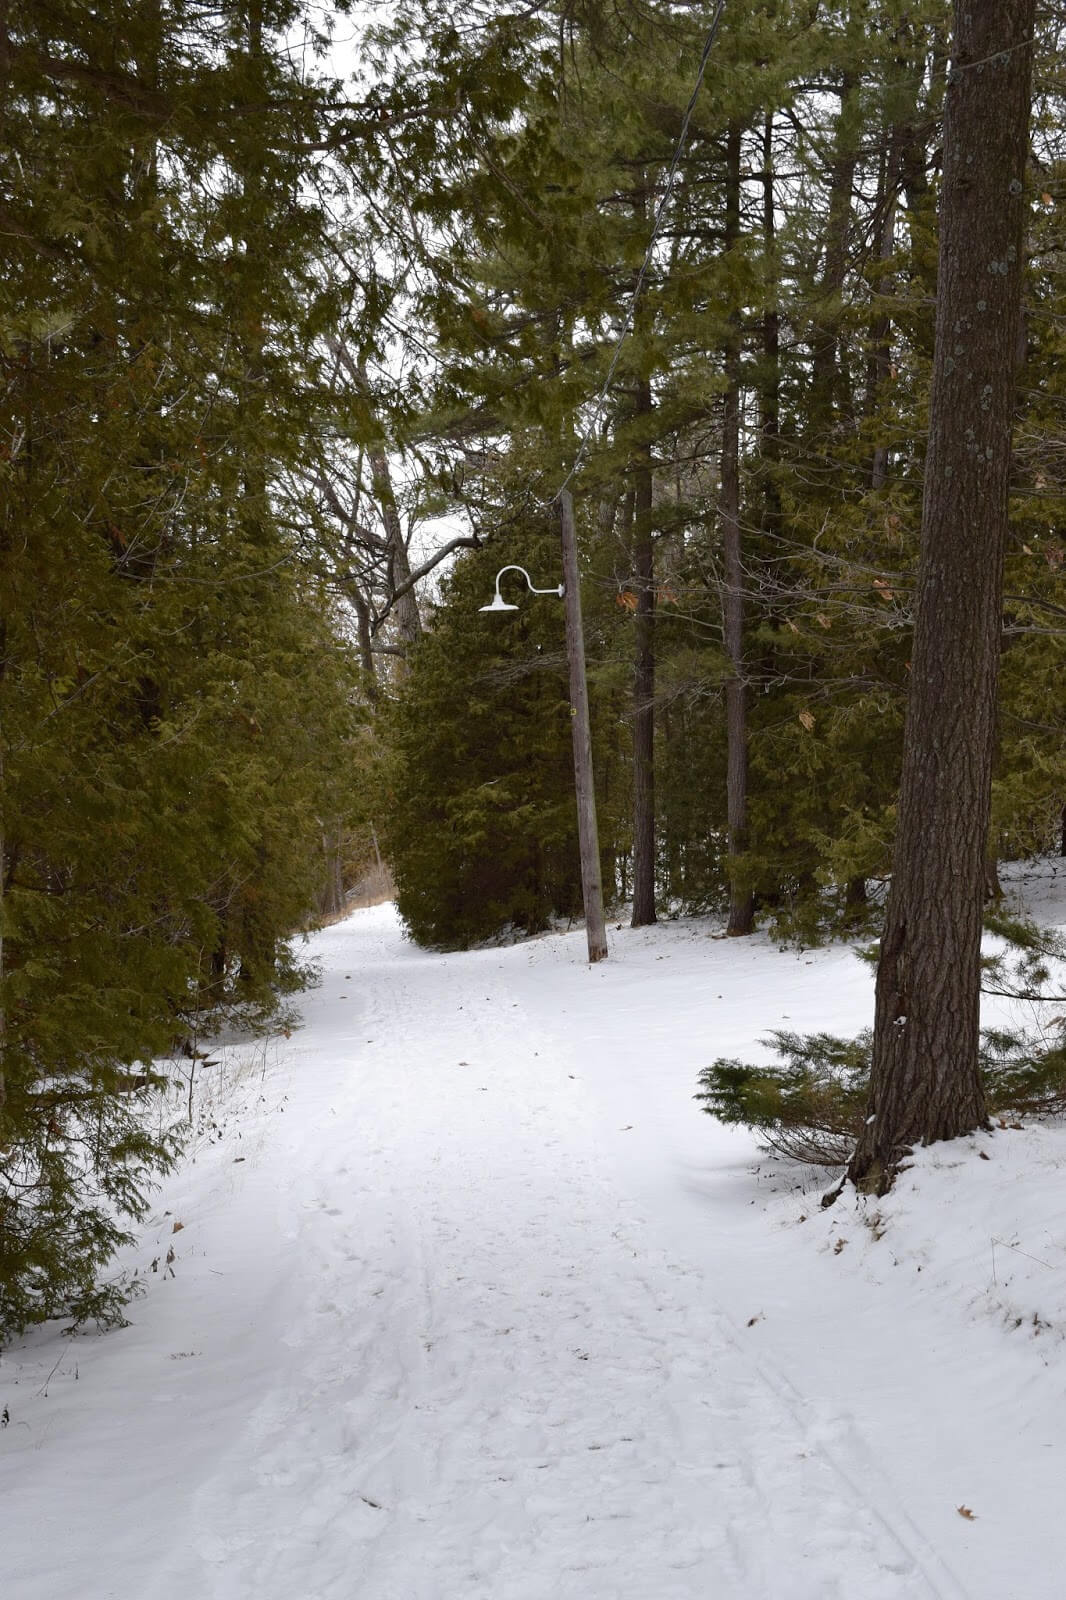 A narrow stretch of Lake Avenue with old streetlights surrounded by forest in the winter